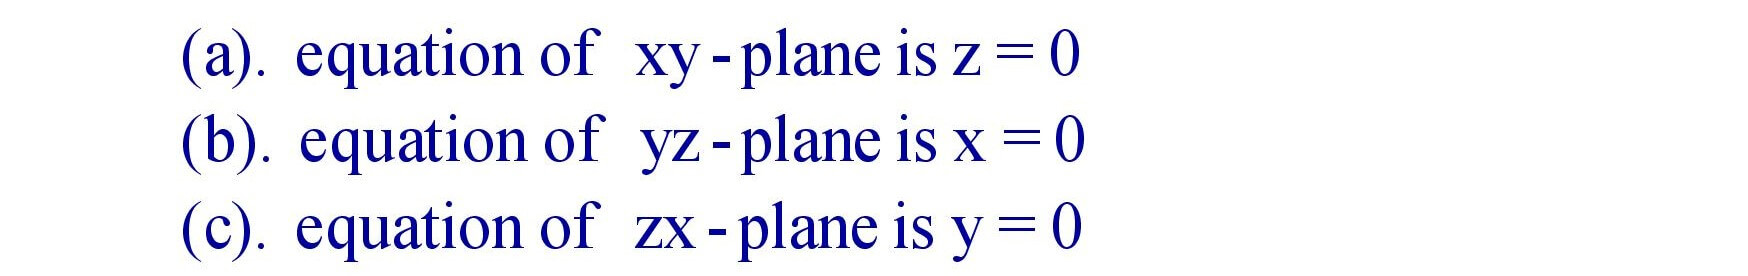 Equation of xy , yz and zx - planes